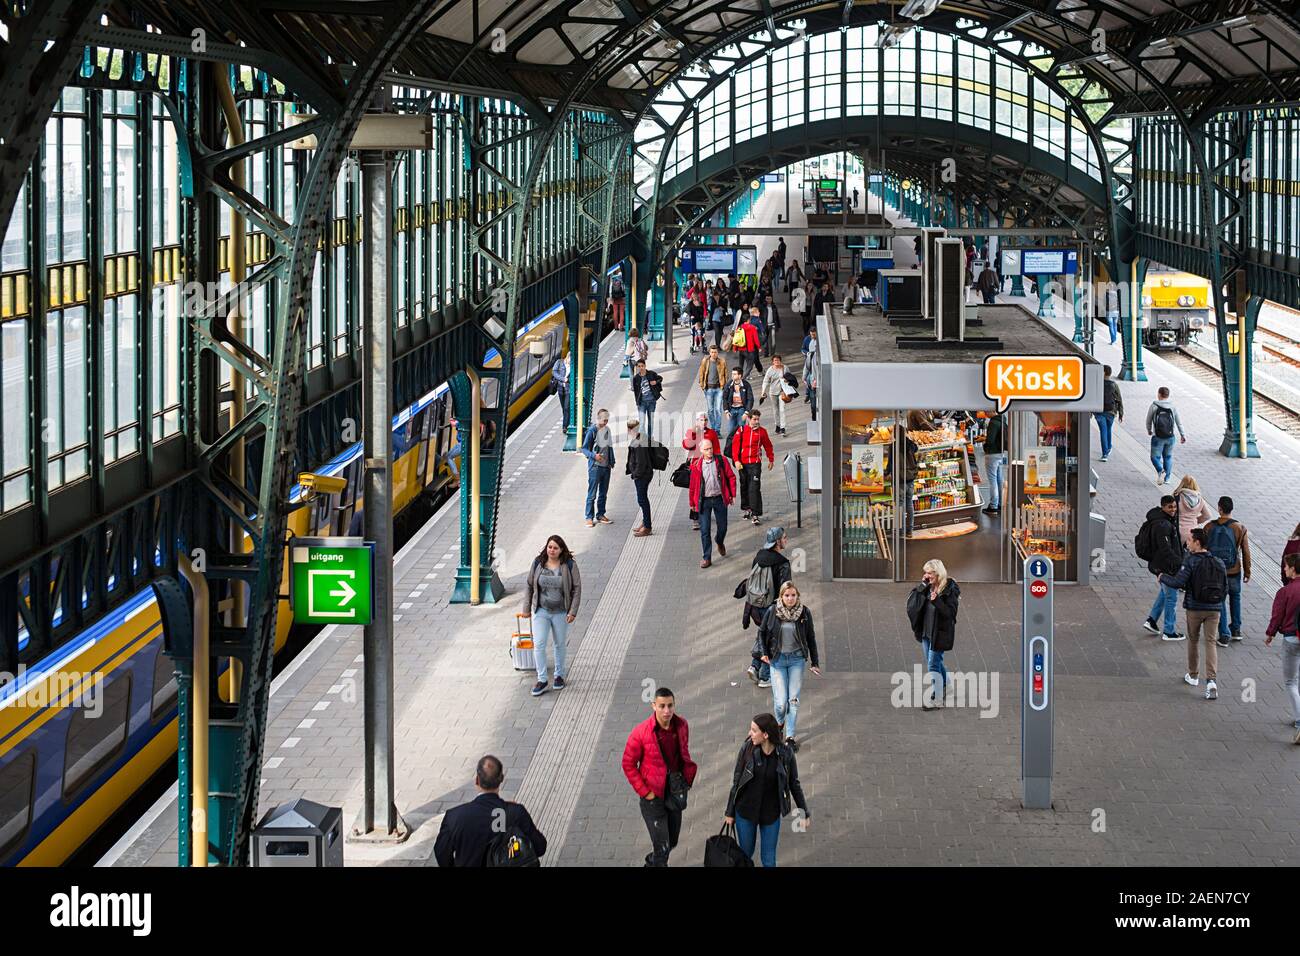 Railway station with passengers waiting for a train at platform. den Bosch  Netherlands Stock Photo - Alamy